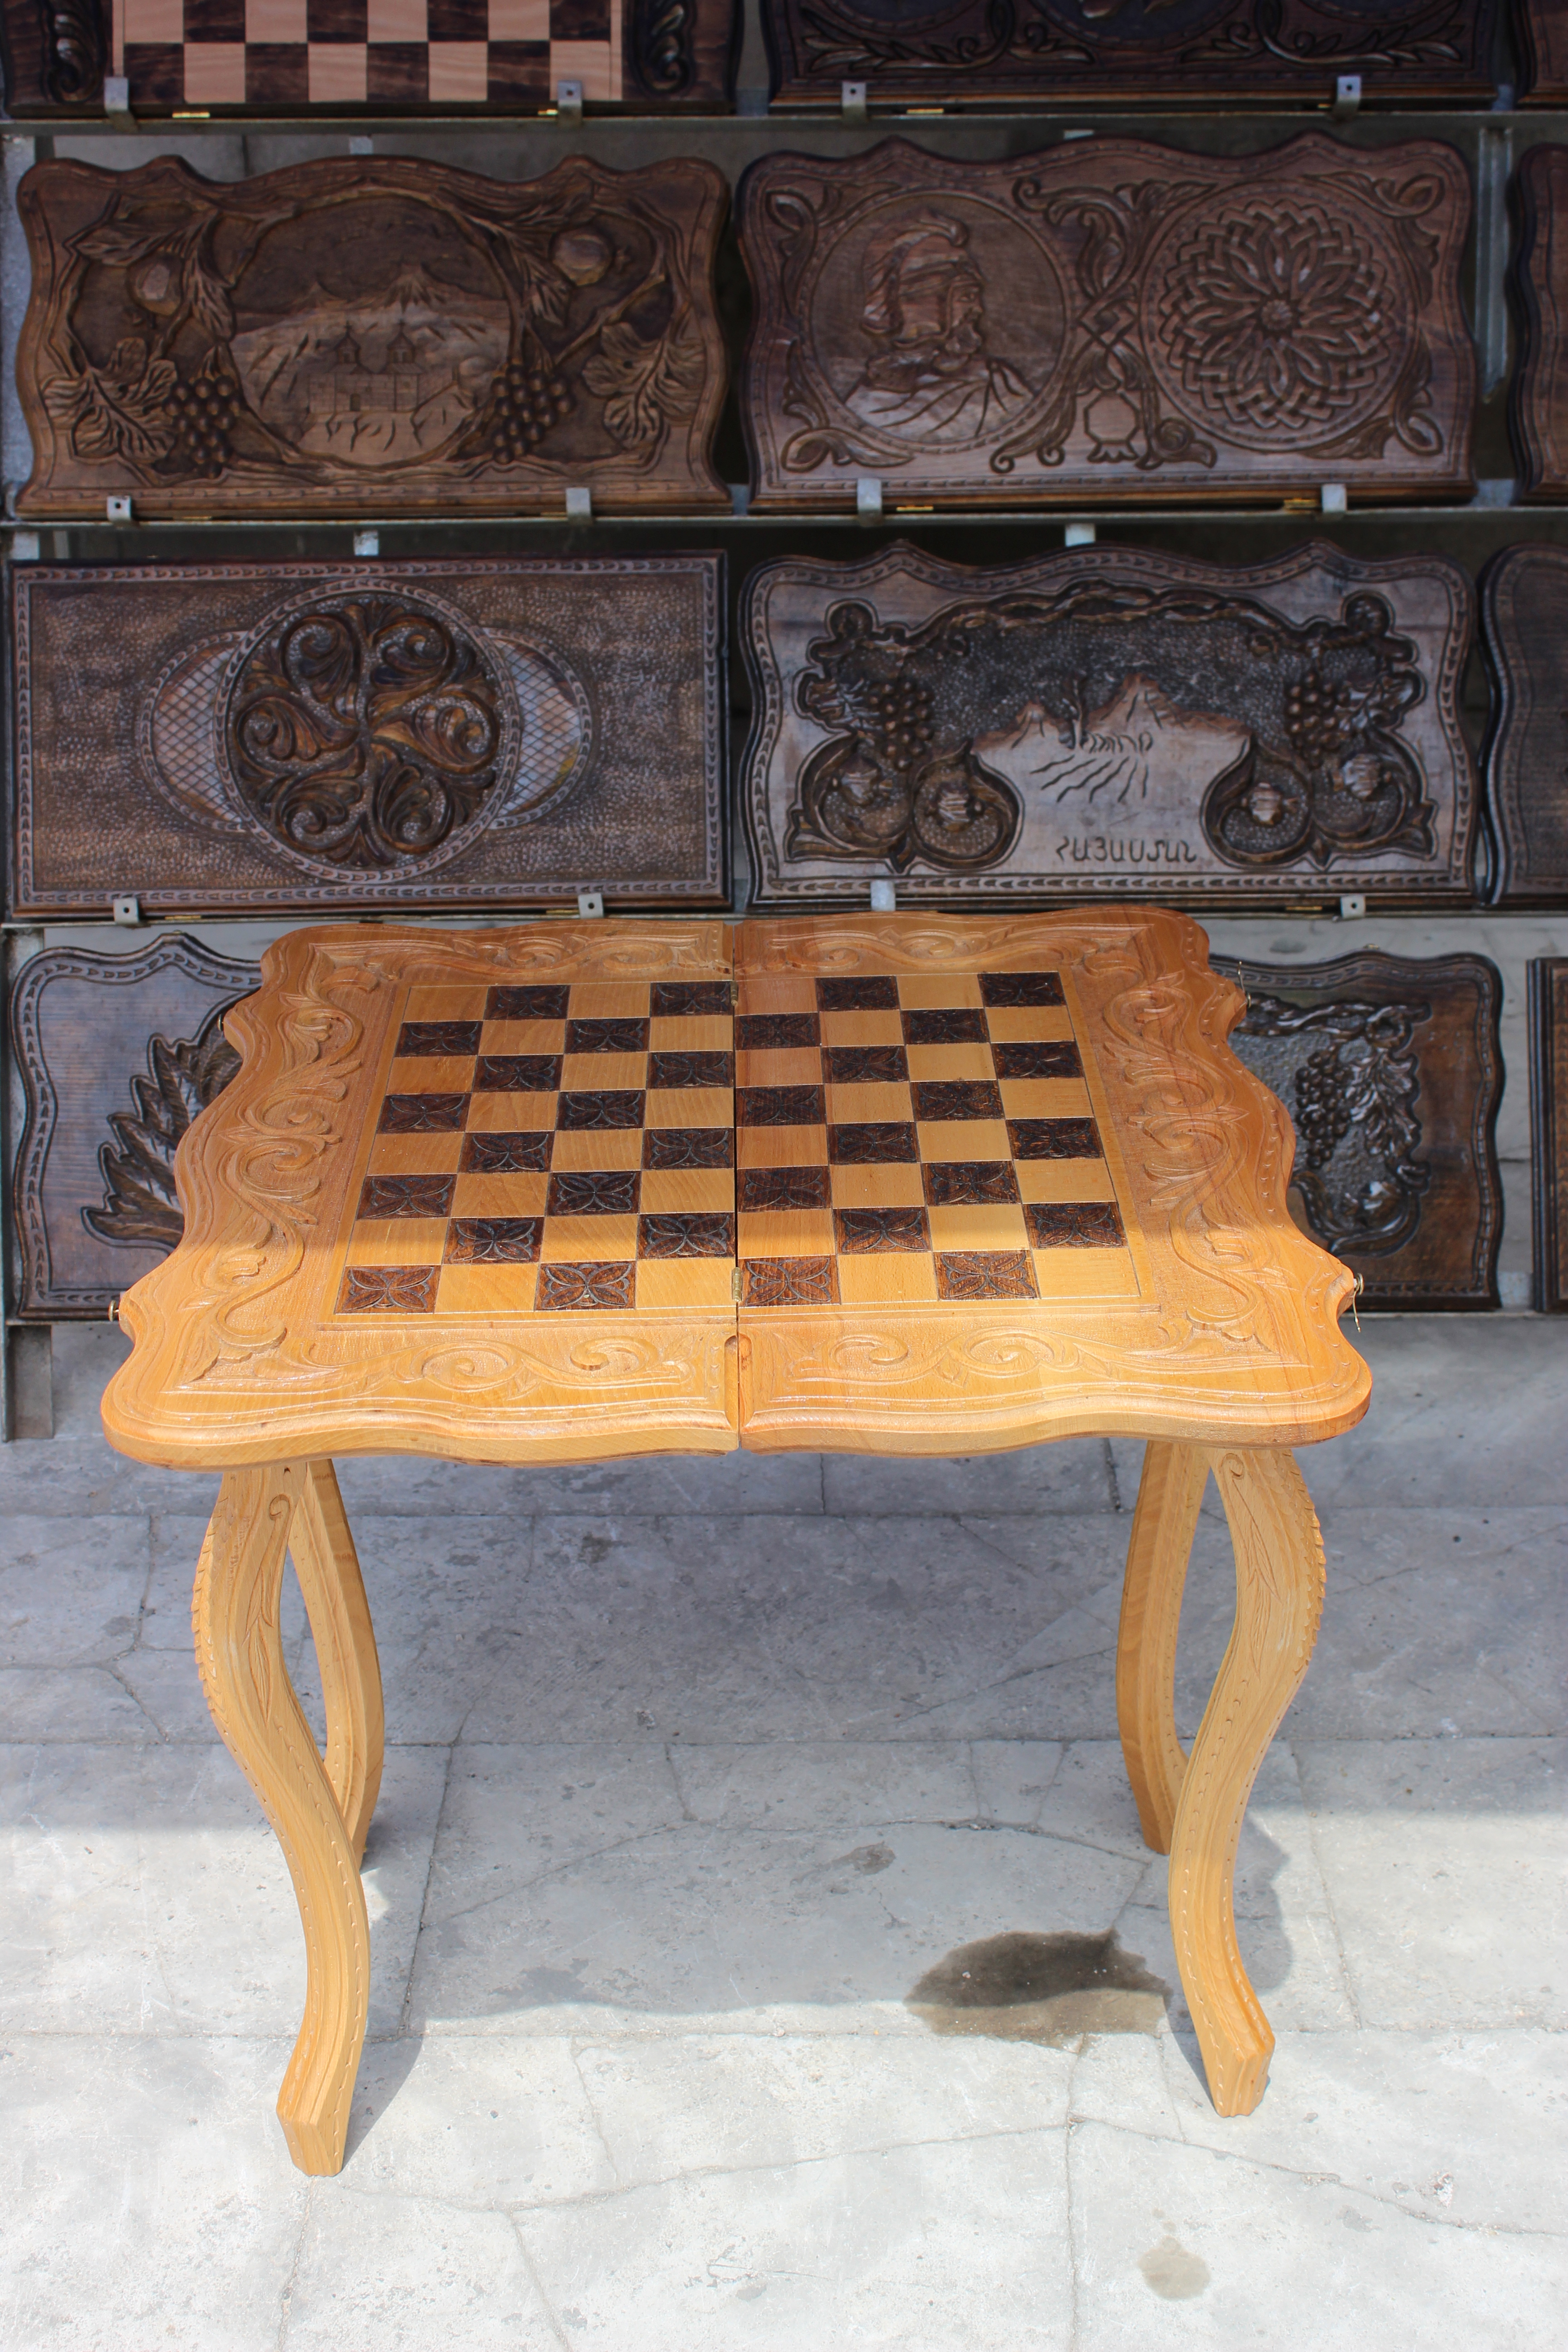 And the chessboard converts... in elegant side table!